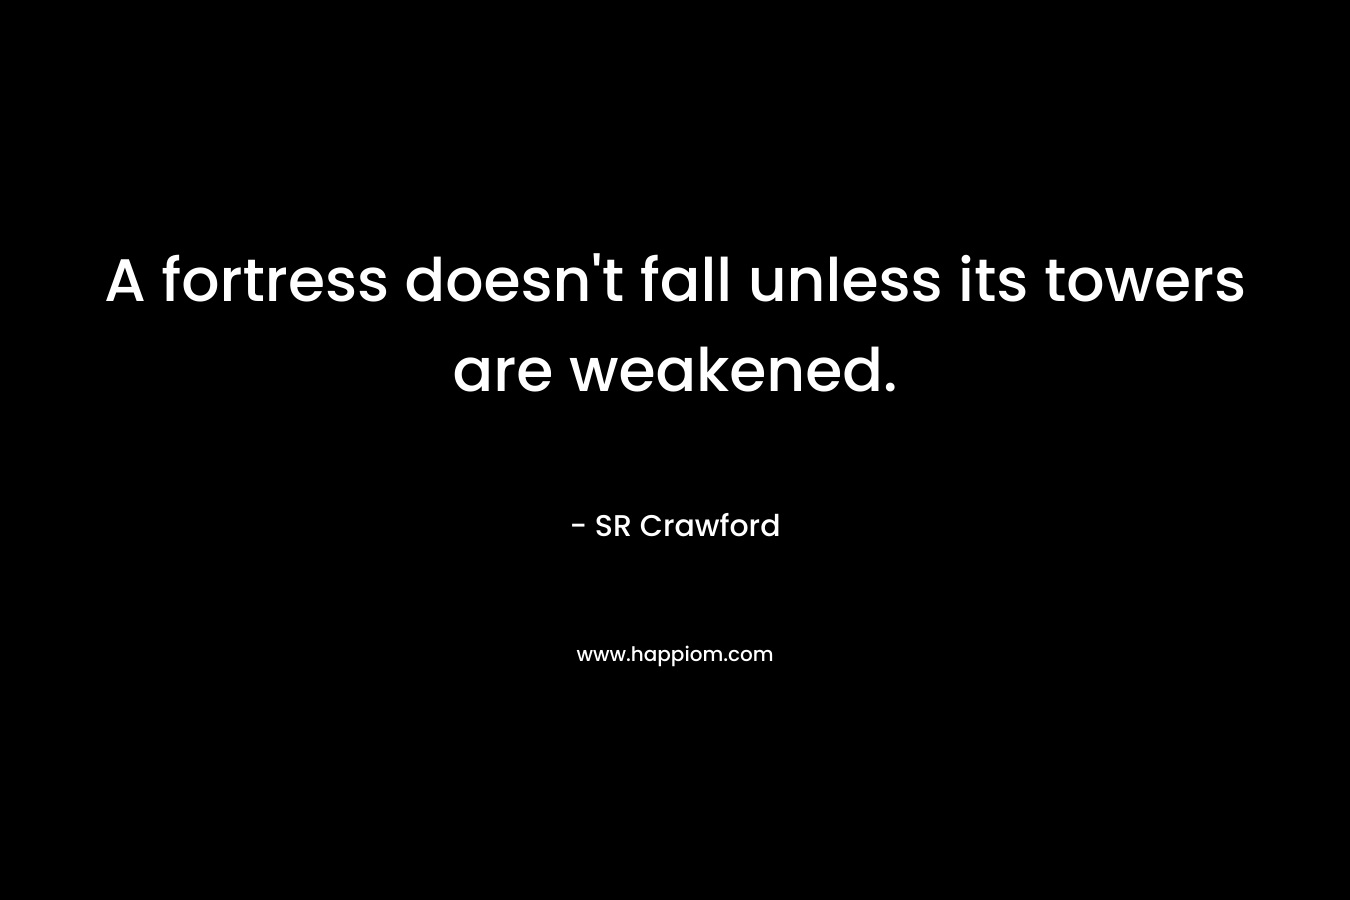 A fortress doesn't fall unless its towers are weakened.